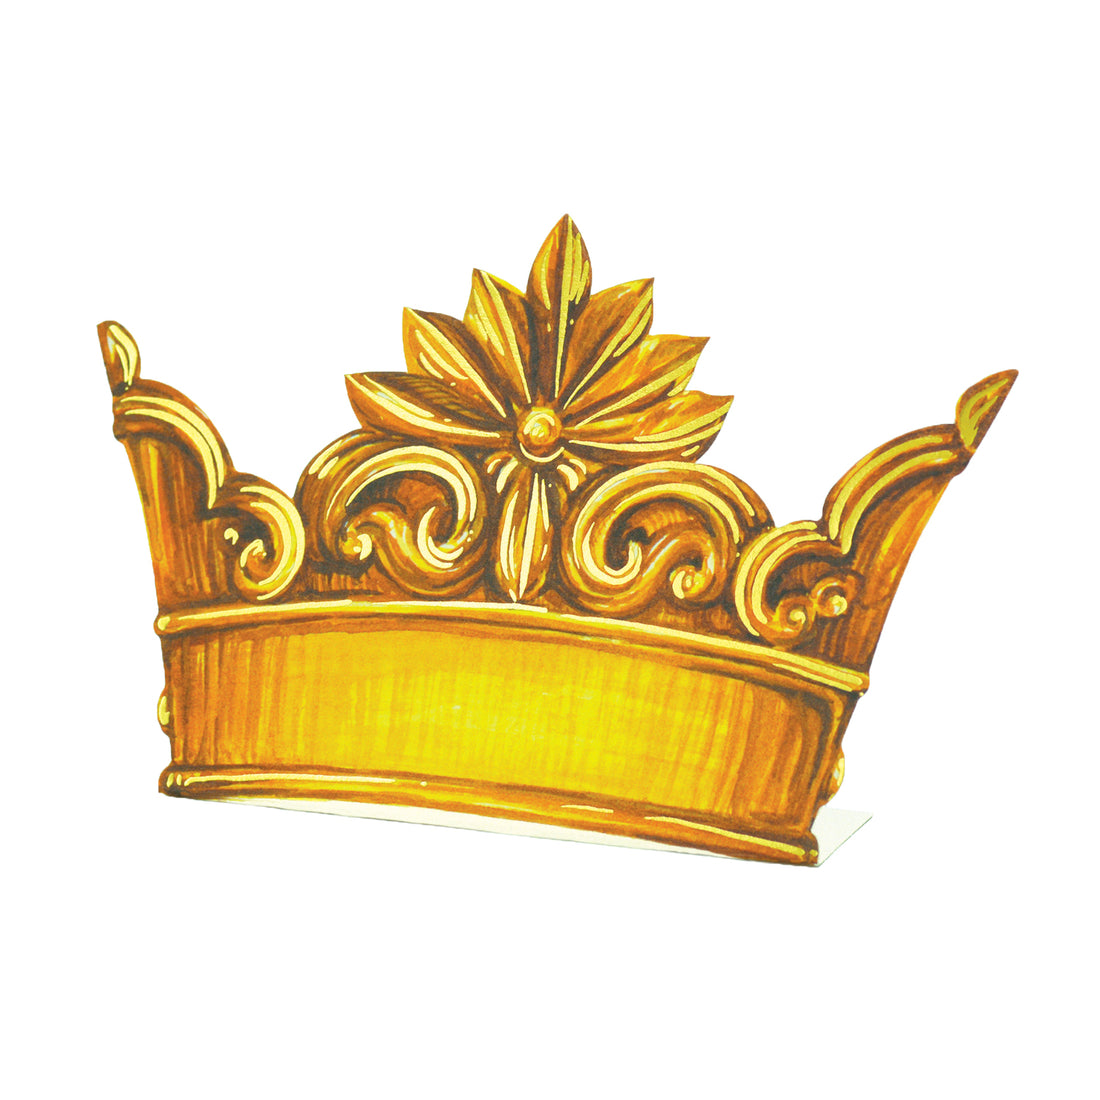 A die-cut freestanding place card featuring an illustrated yellow-gold crown with ornate details along the top edge, and a wide band along the bottom.